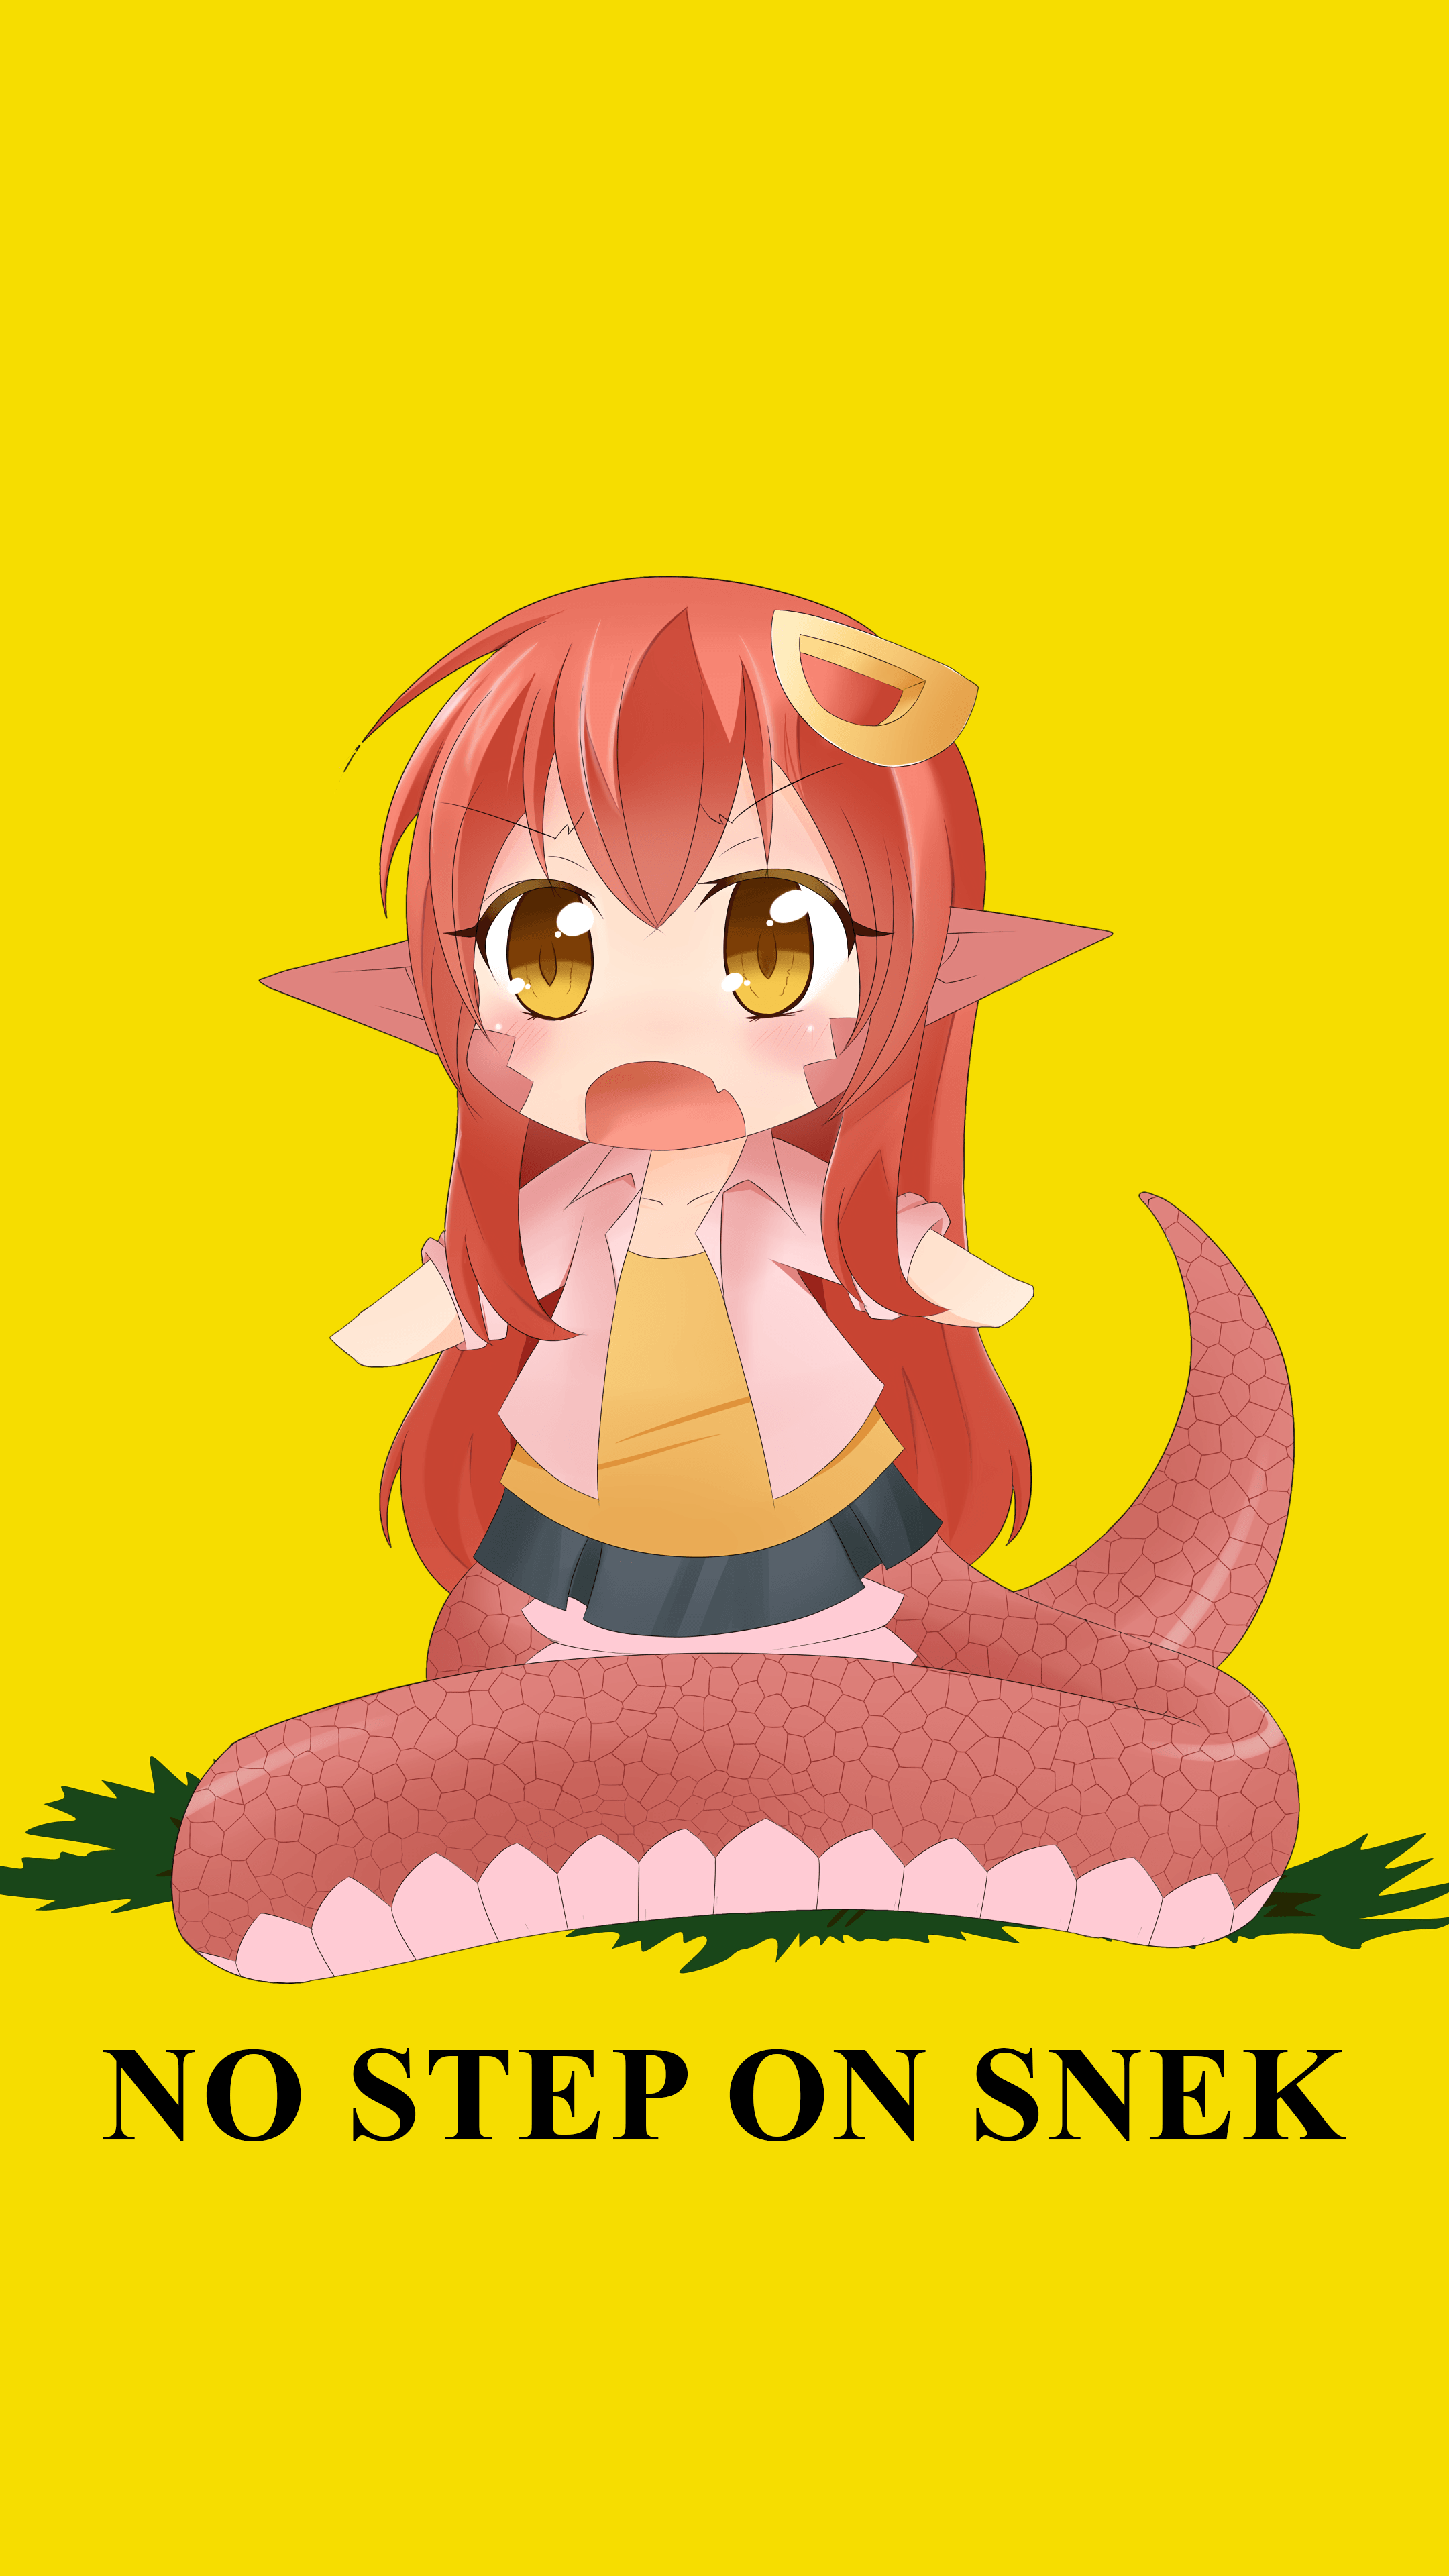 No step on snek [Monster Musume]Download links in comments